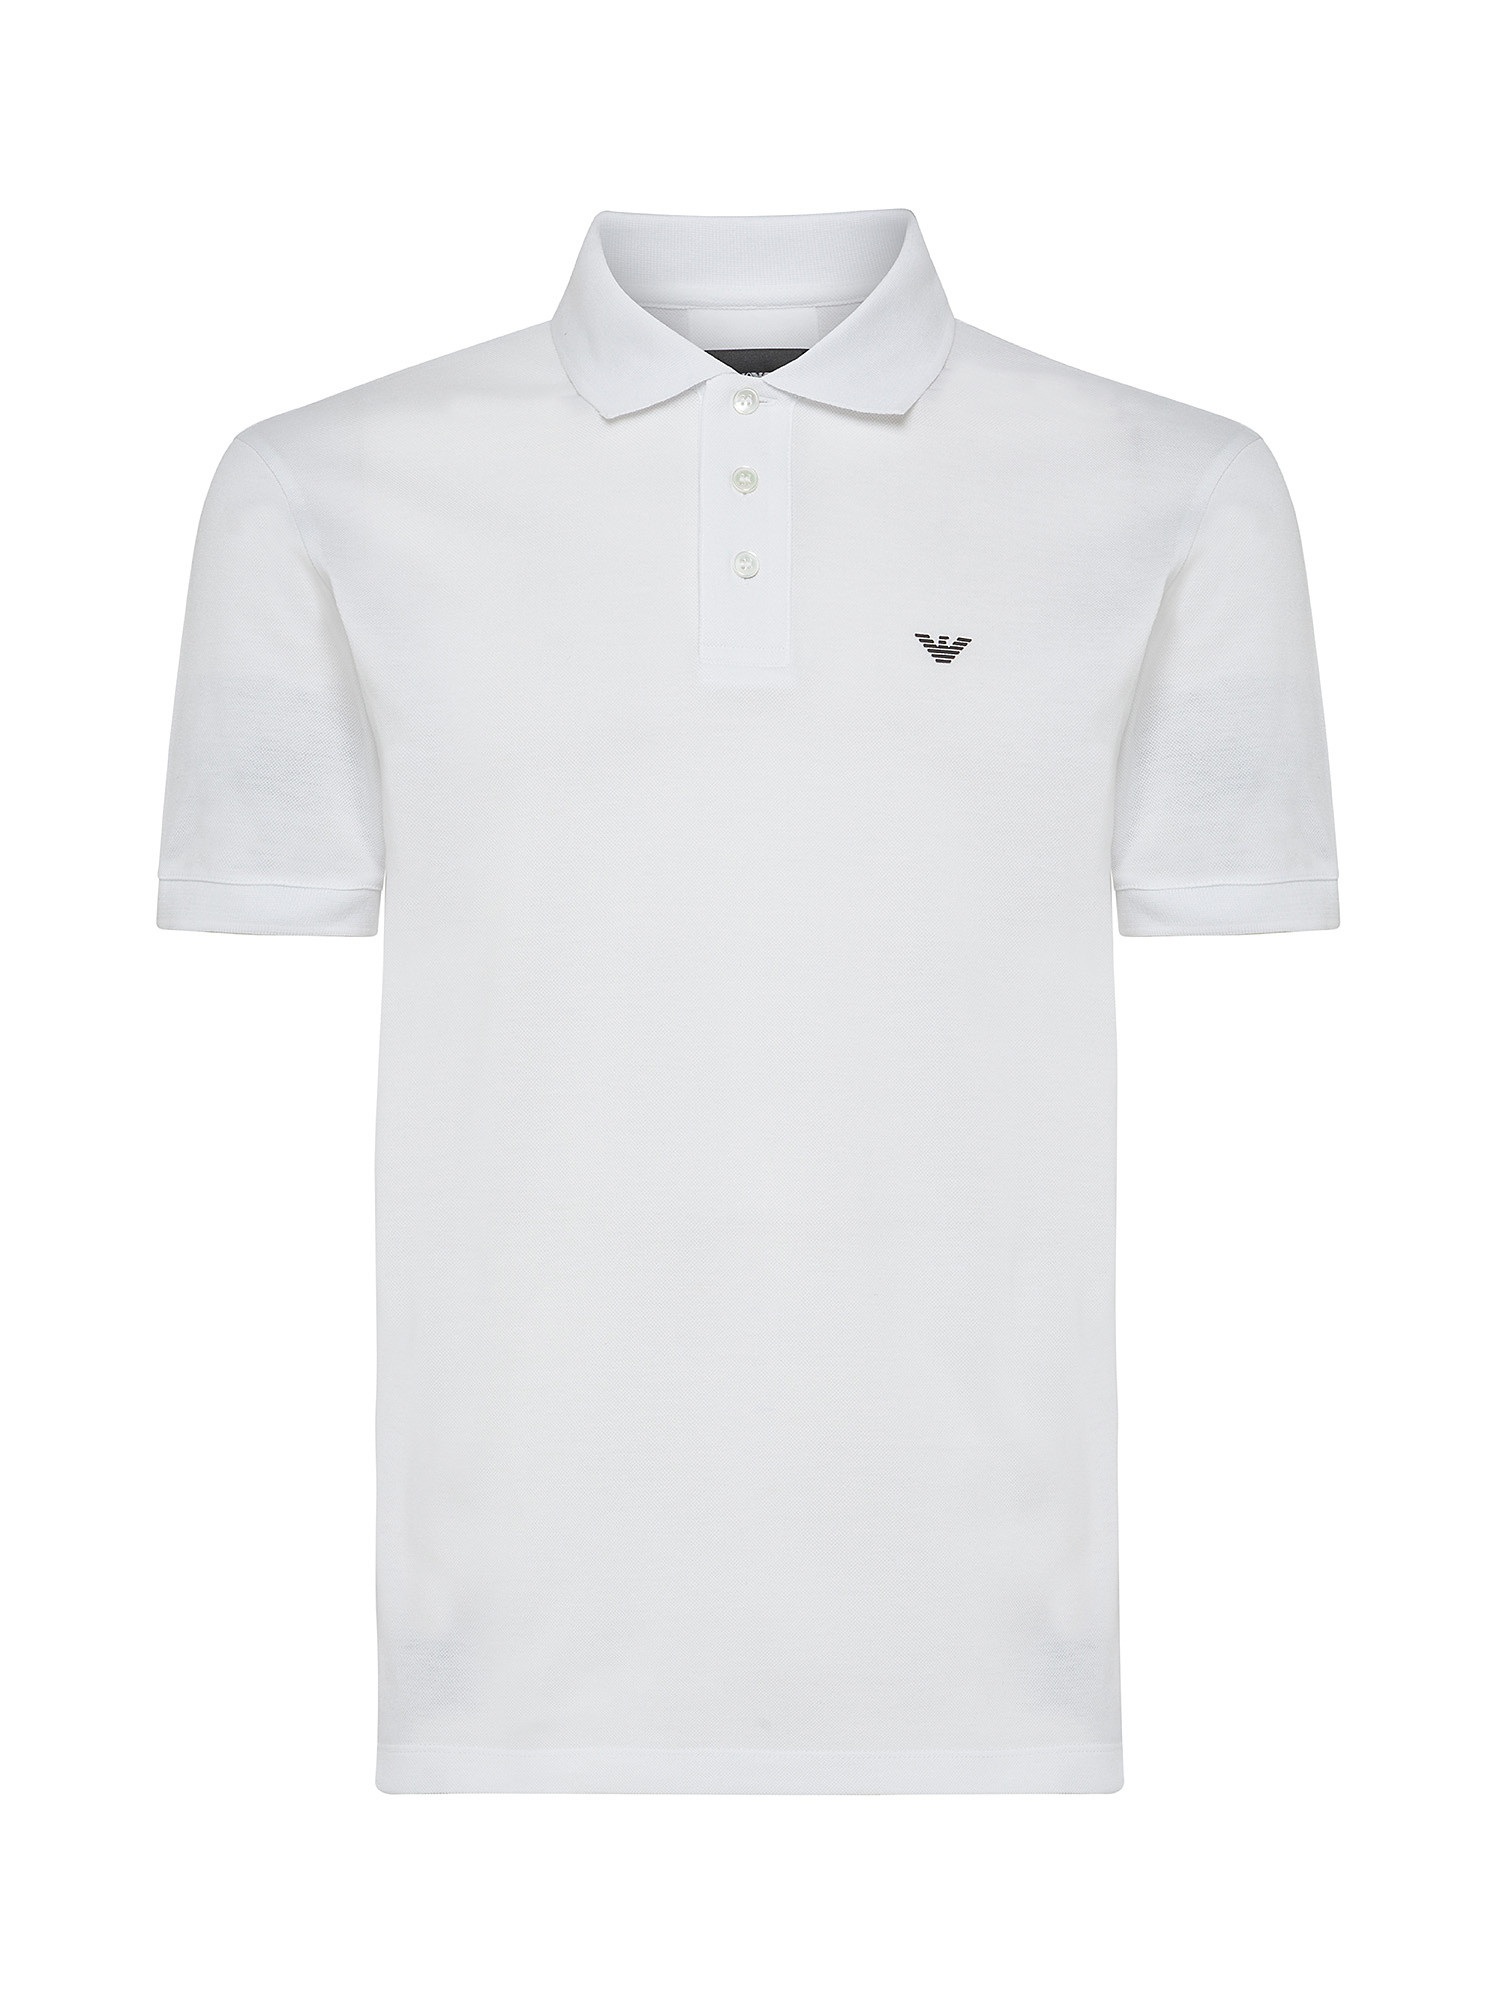 Emporio Armani - Cotton polo shirt with eagle logo embroidery, White, large image number 0